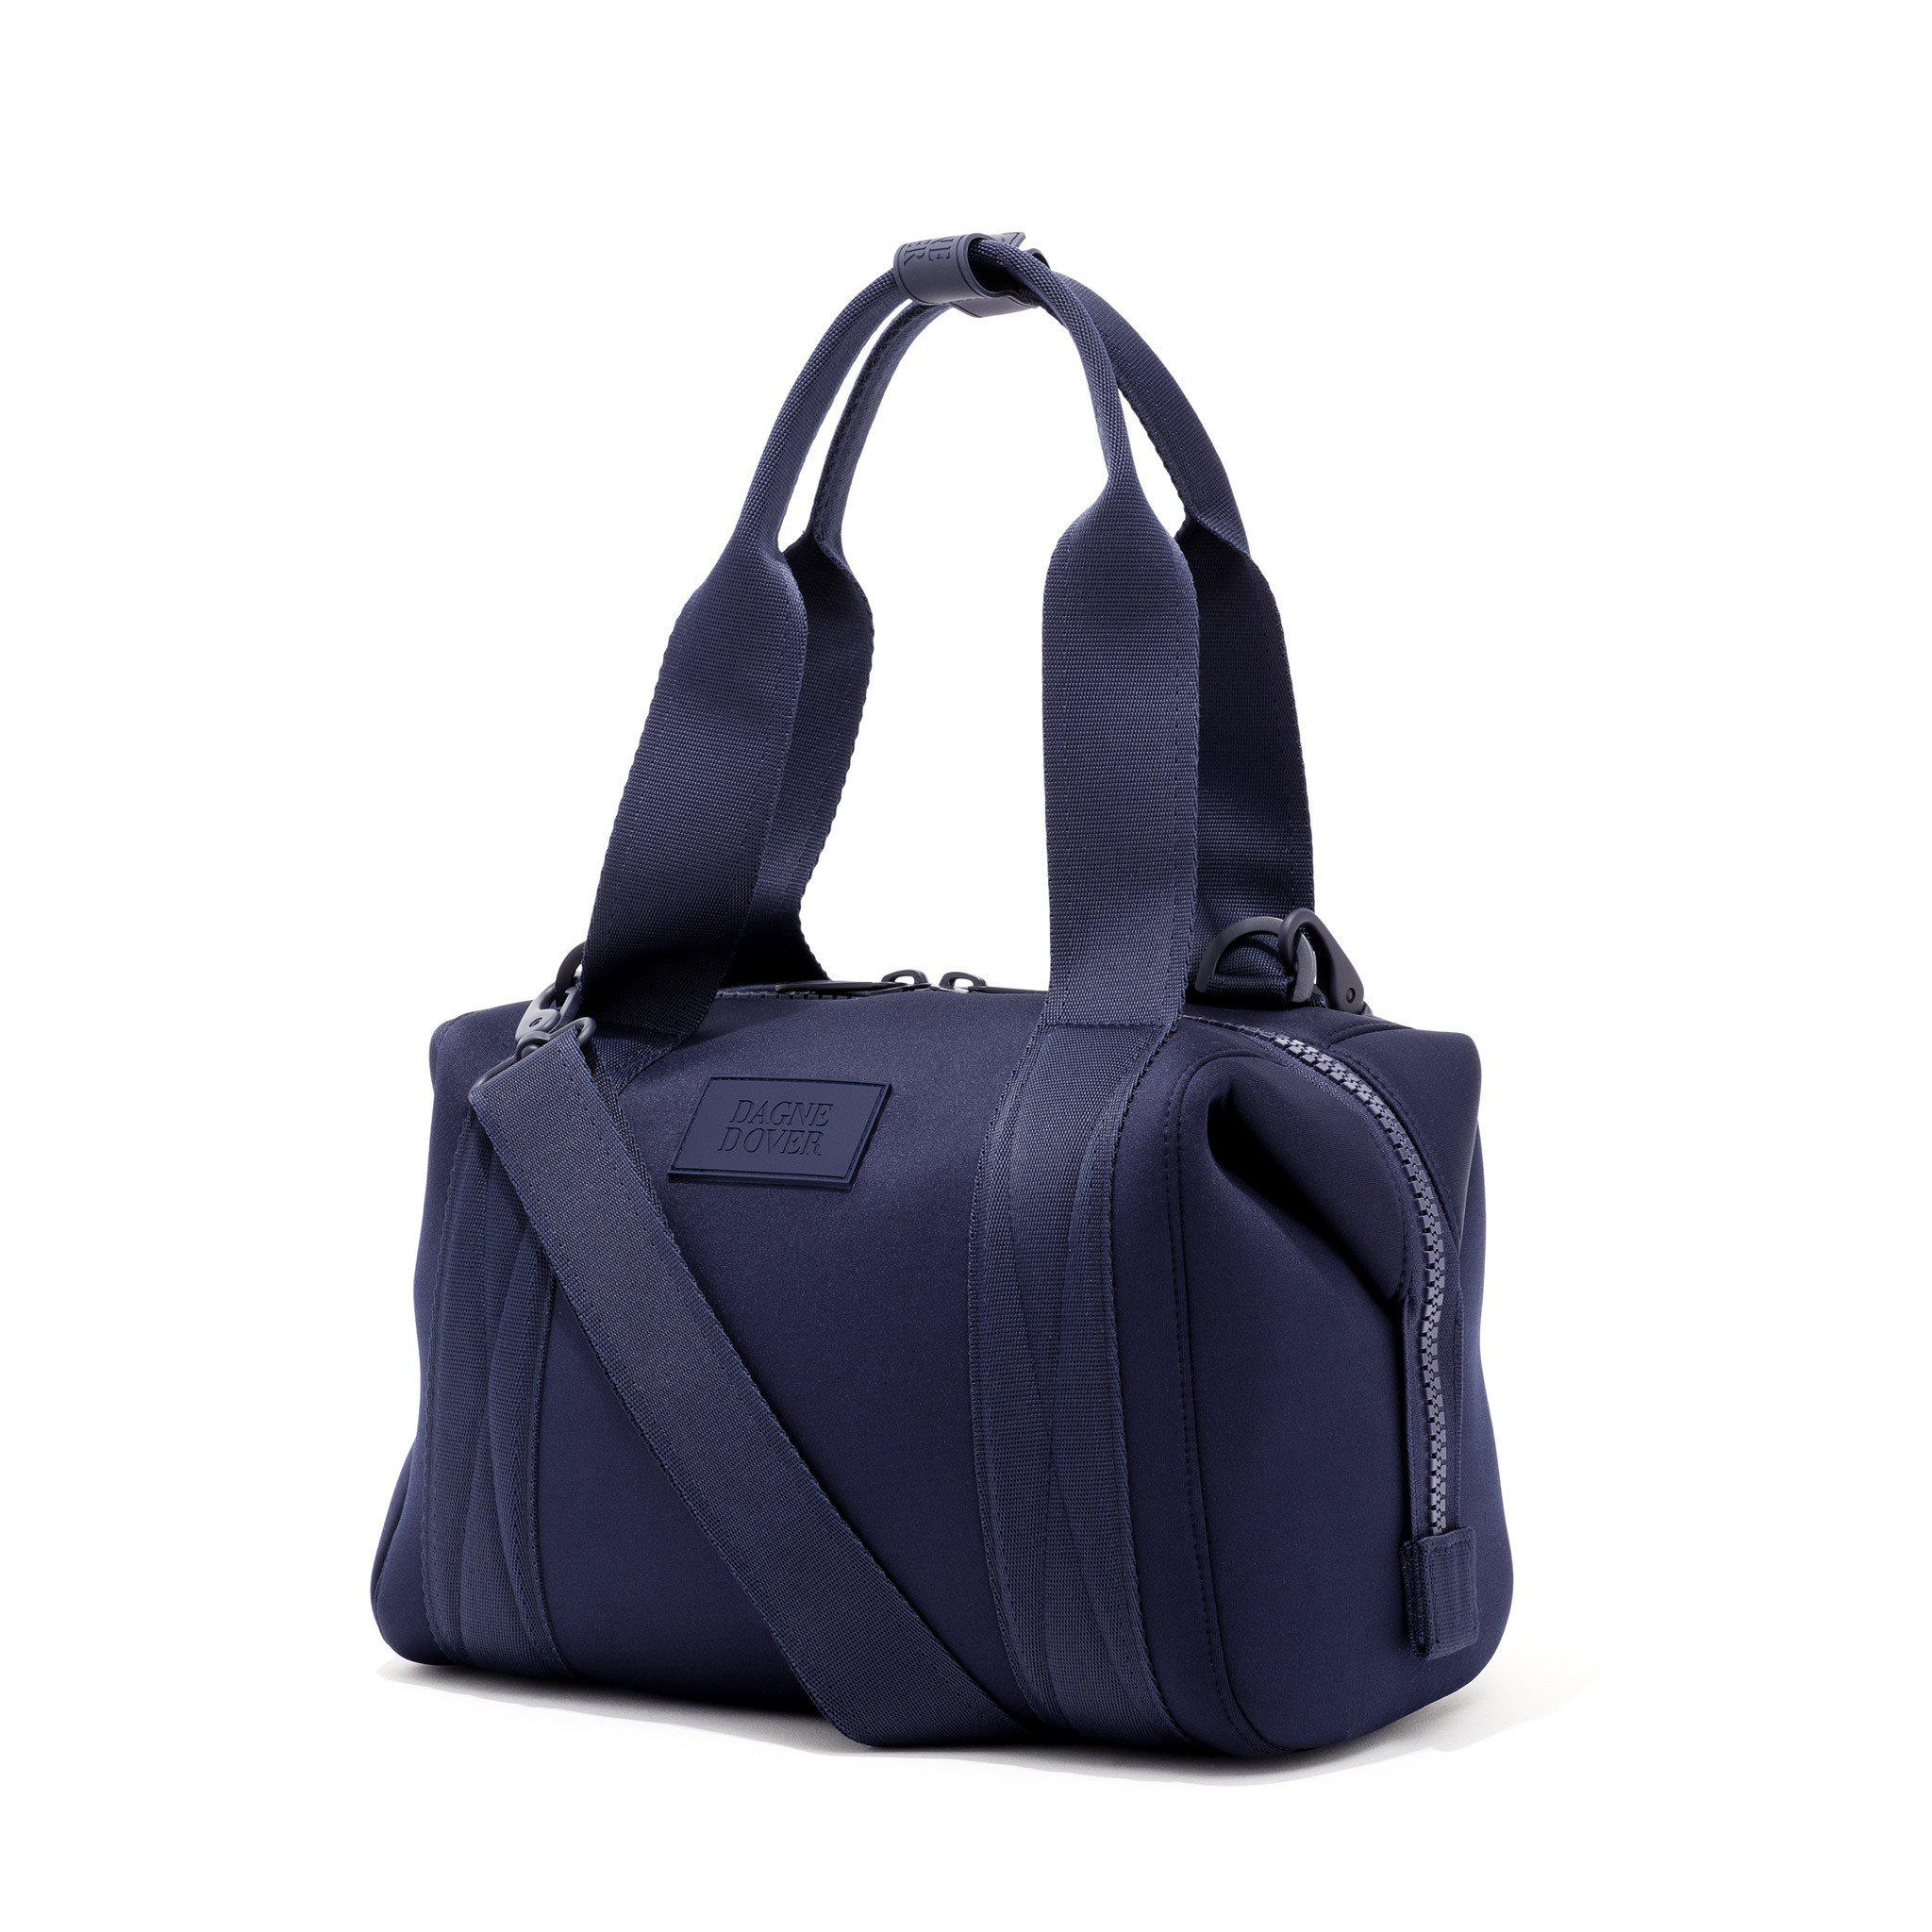 Dagne Dover Landon Carryall - Storm - Small in Blue - Save 19% - Lyst